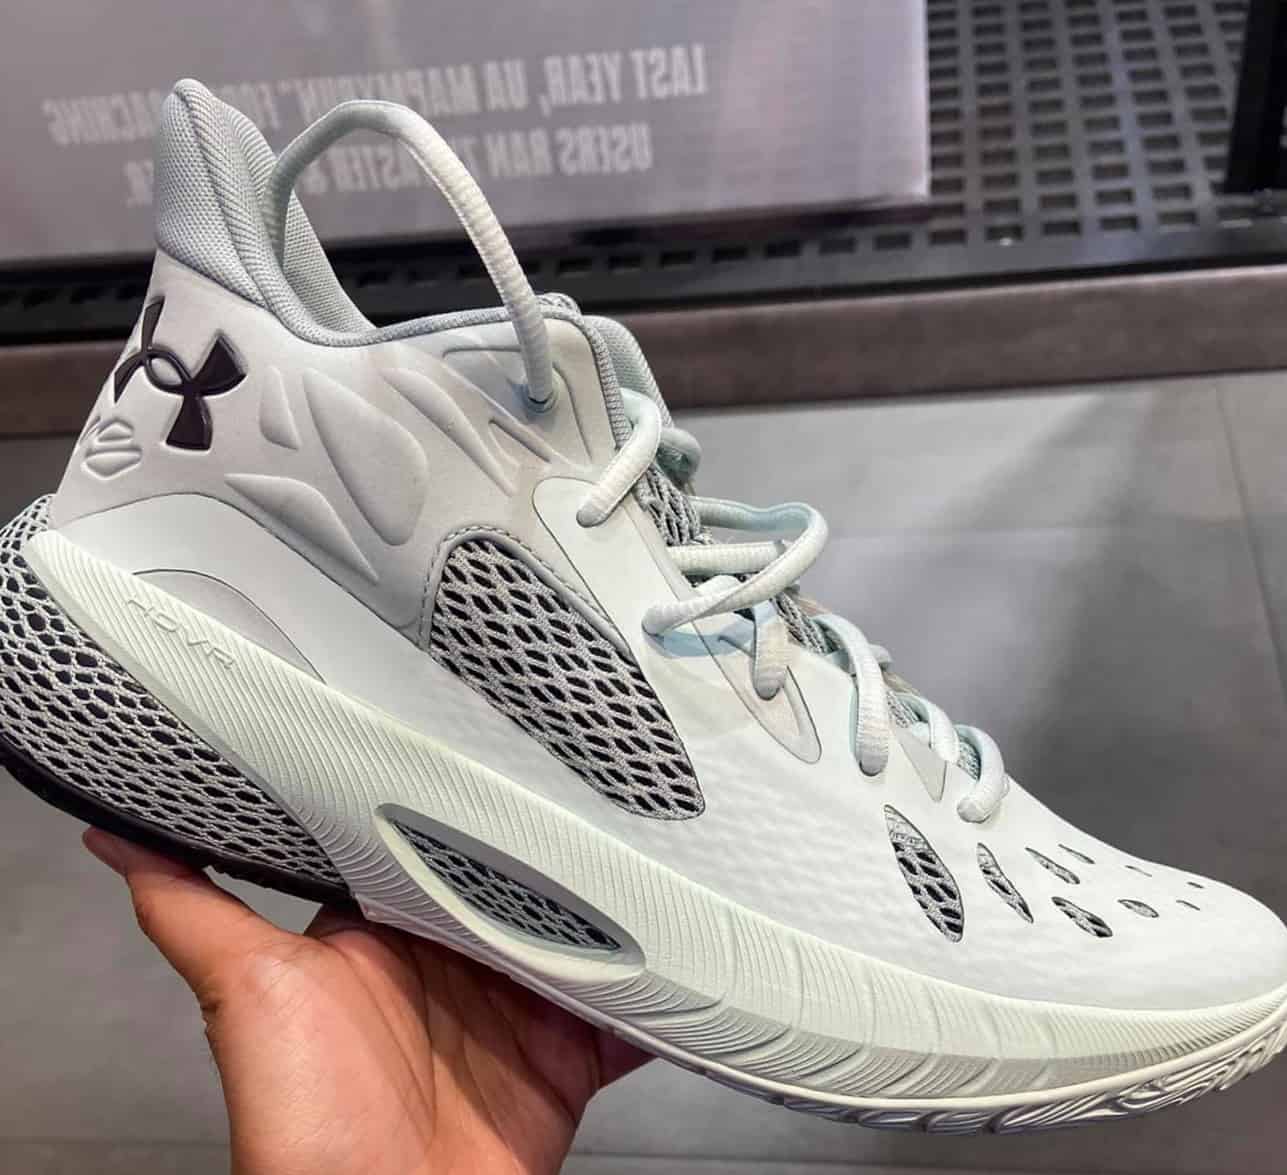 7 Best Basketball Shoes For Narrow Feet In 2022 [Reviewed]